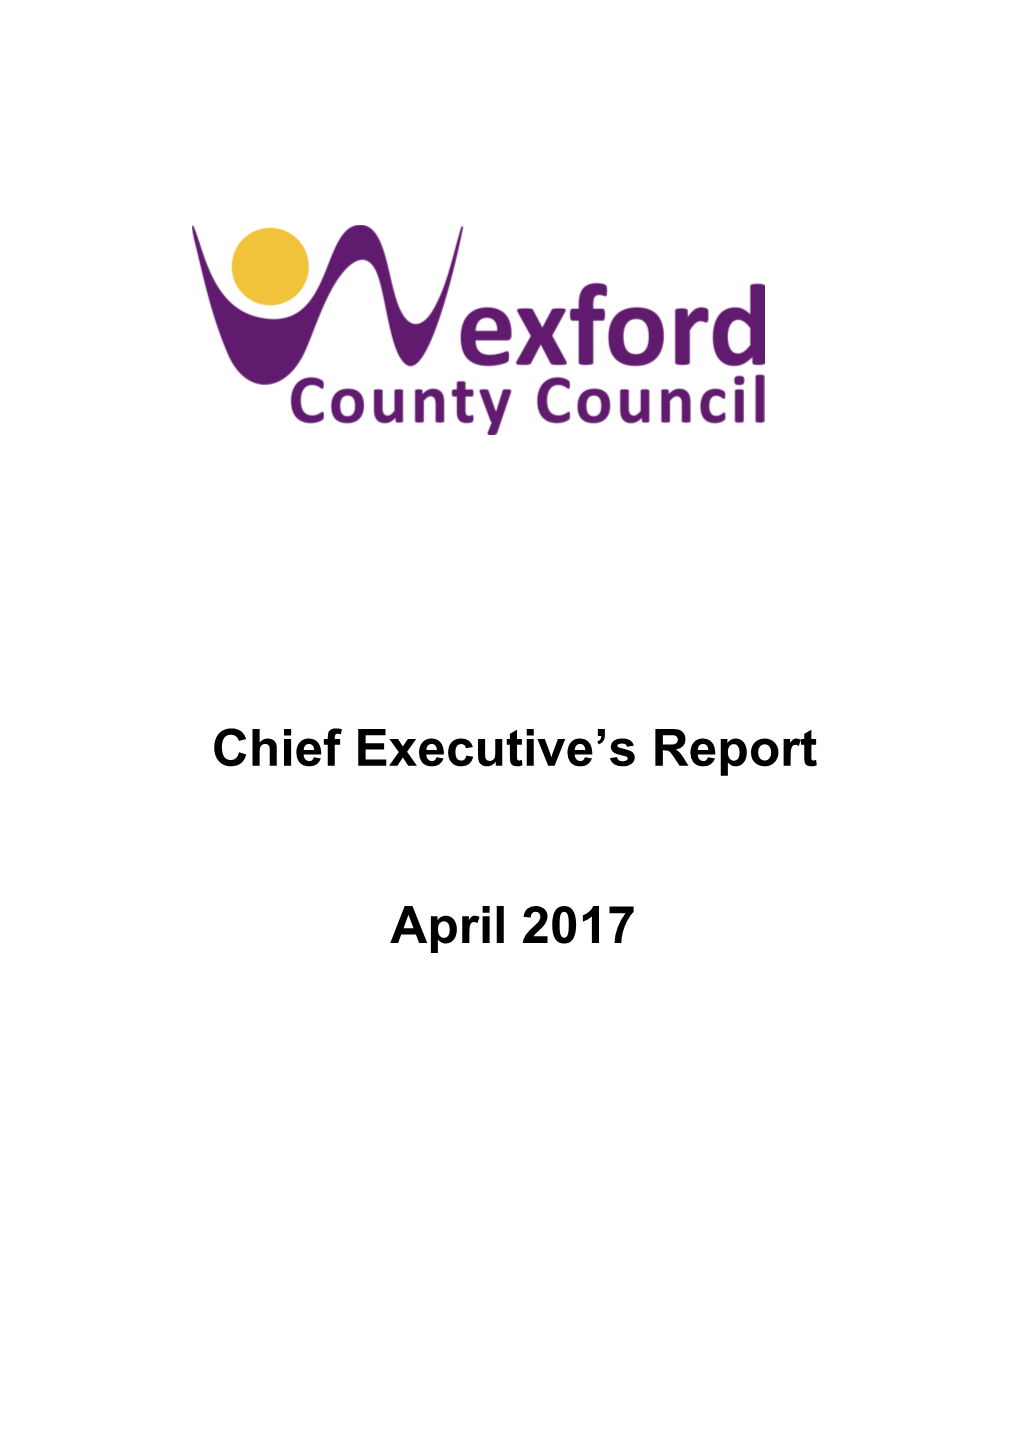 April 2017 to an Cathaoirleach & Each Member of Wexford County Council